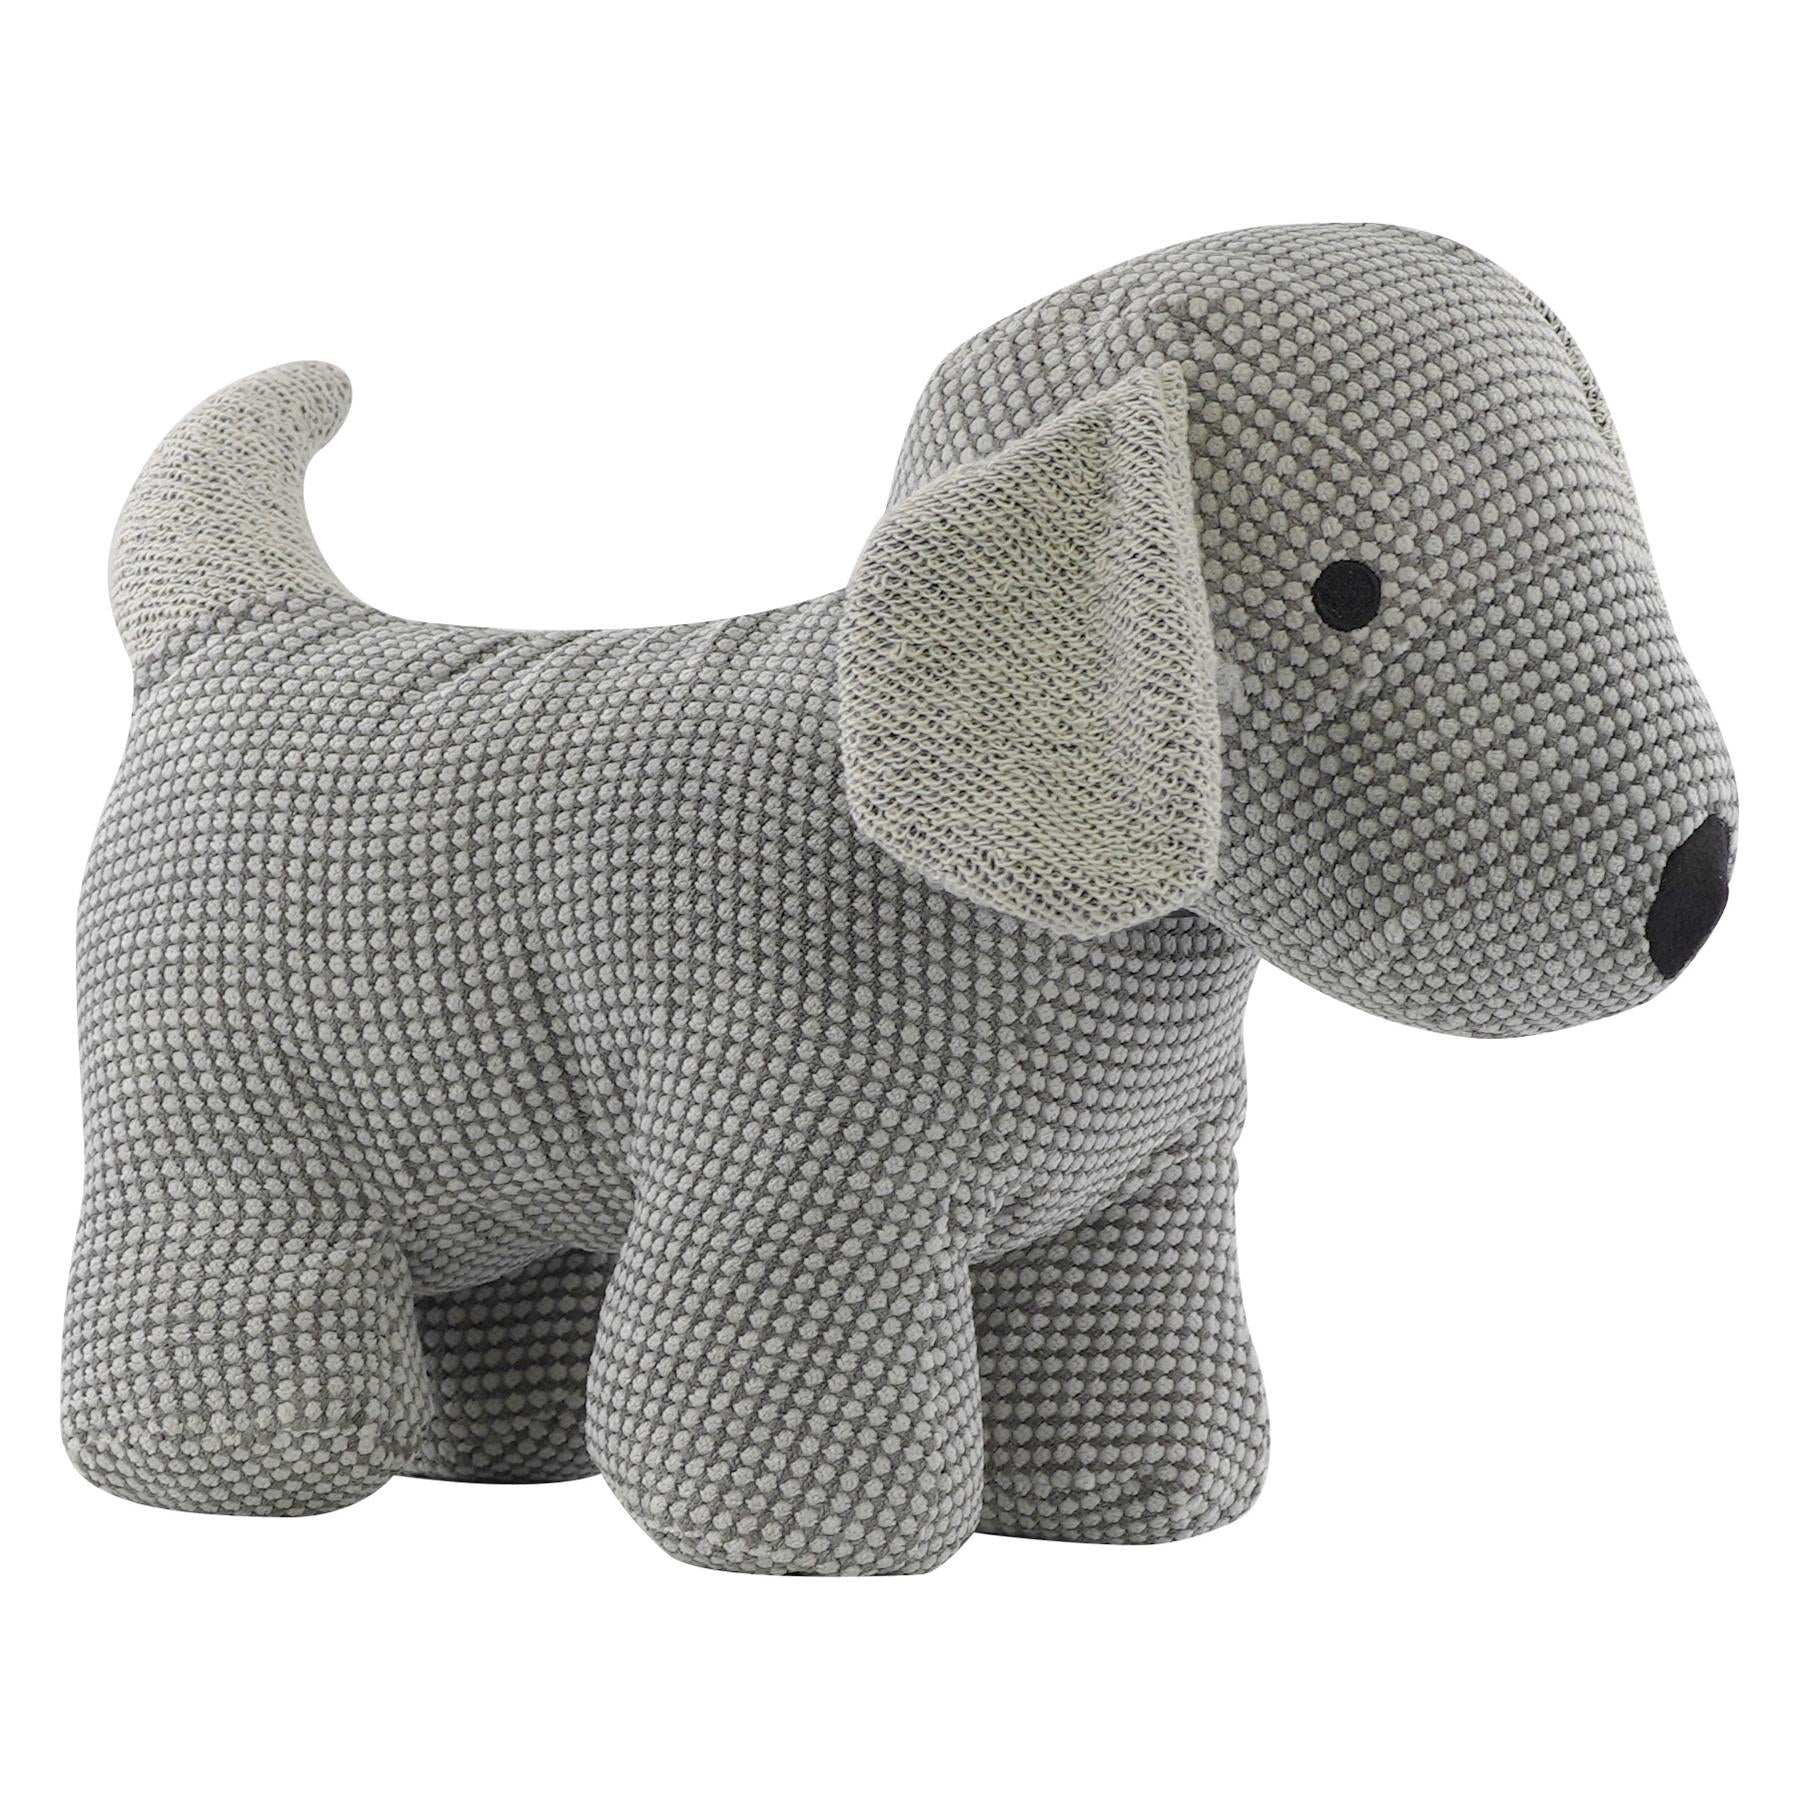 Dog Design Heavy Fabric Door Stopper by Geezy - The Magic Toy Shop